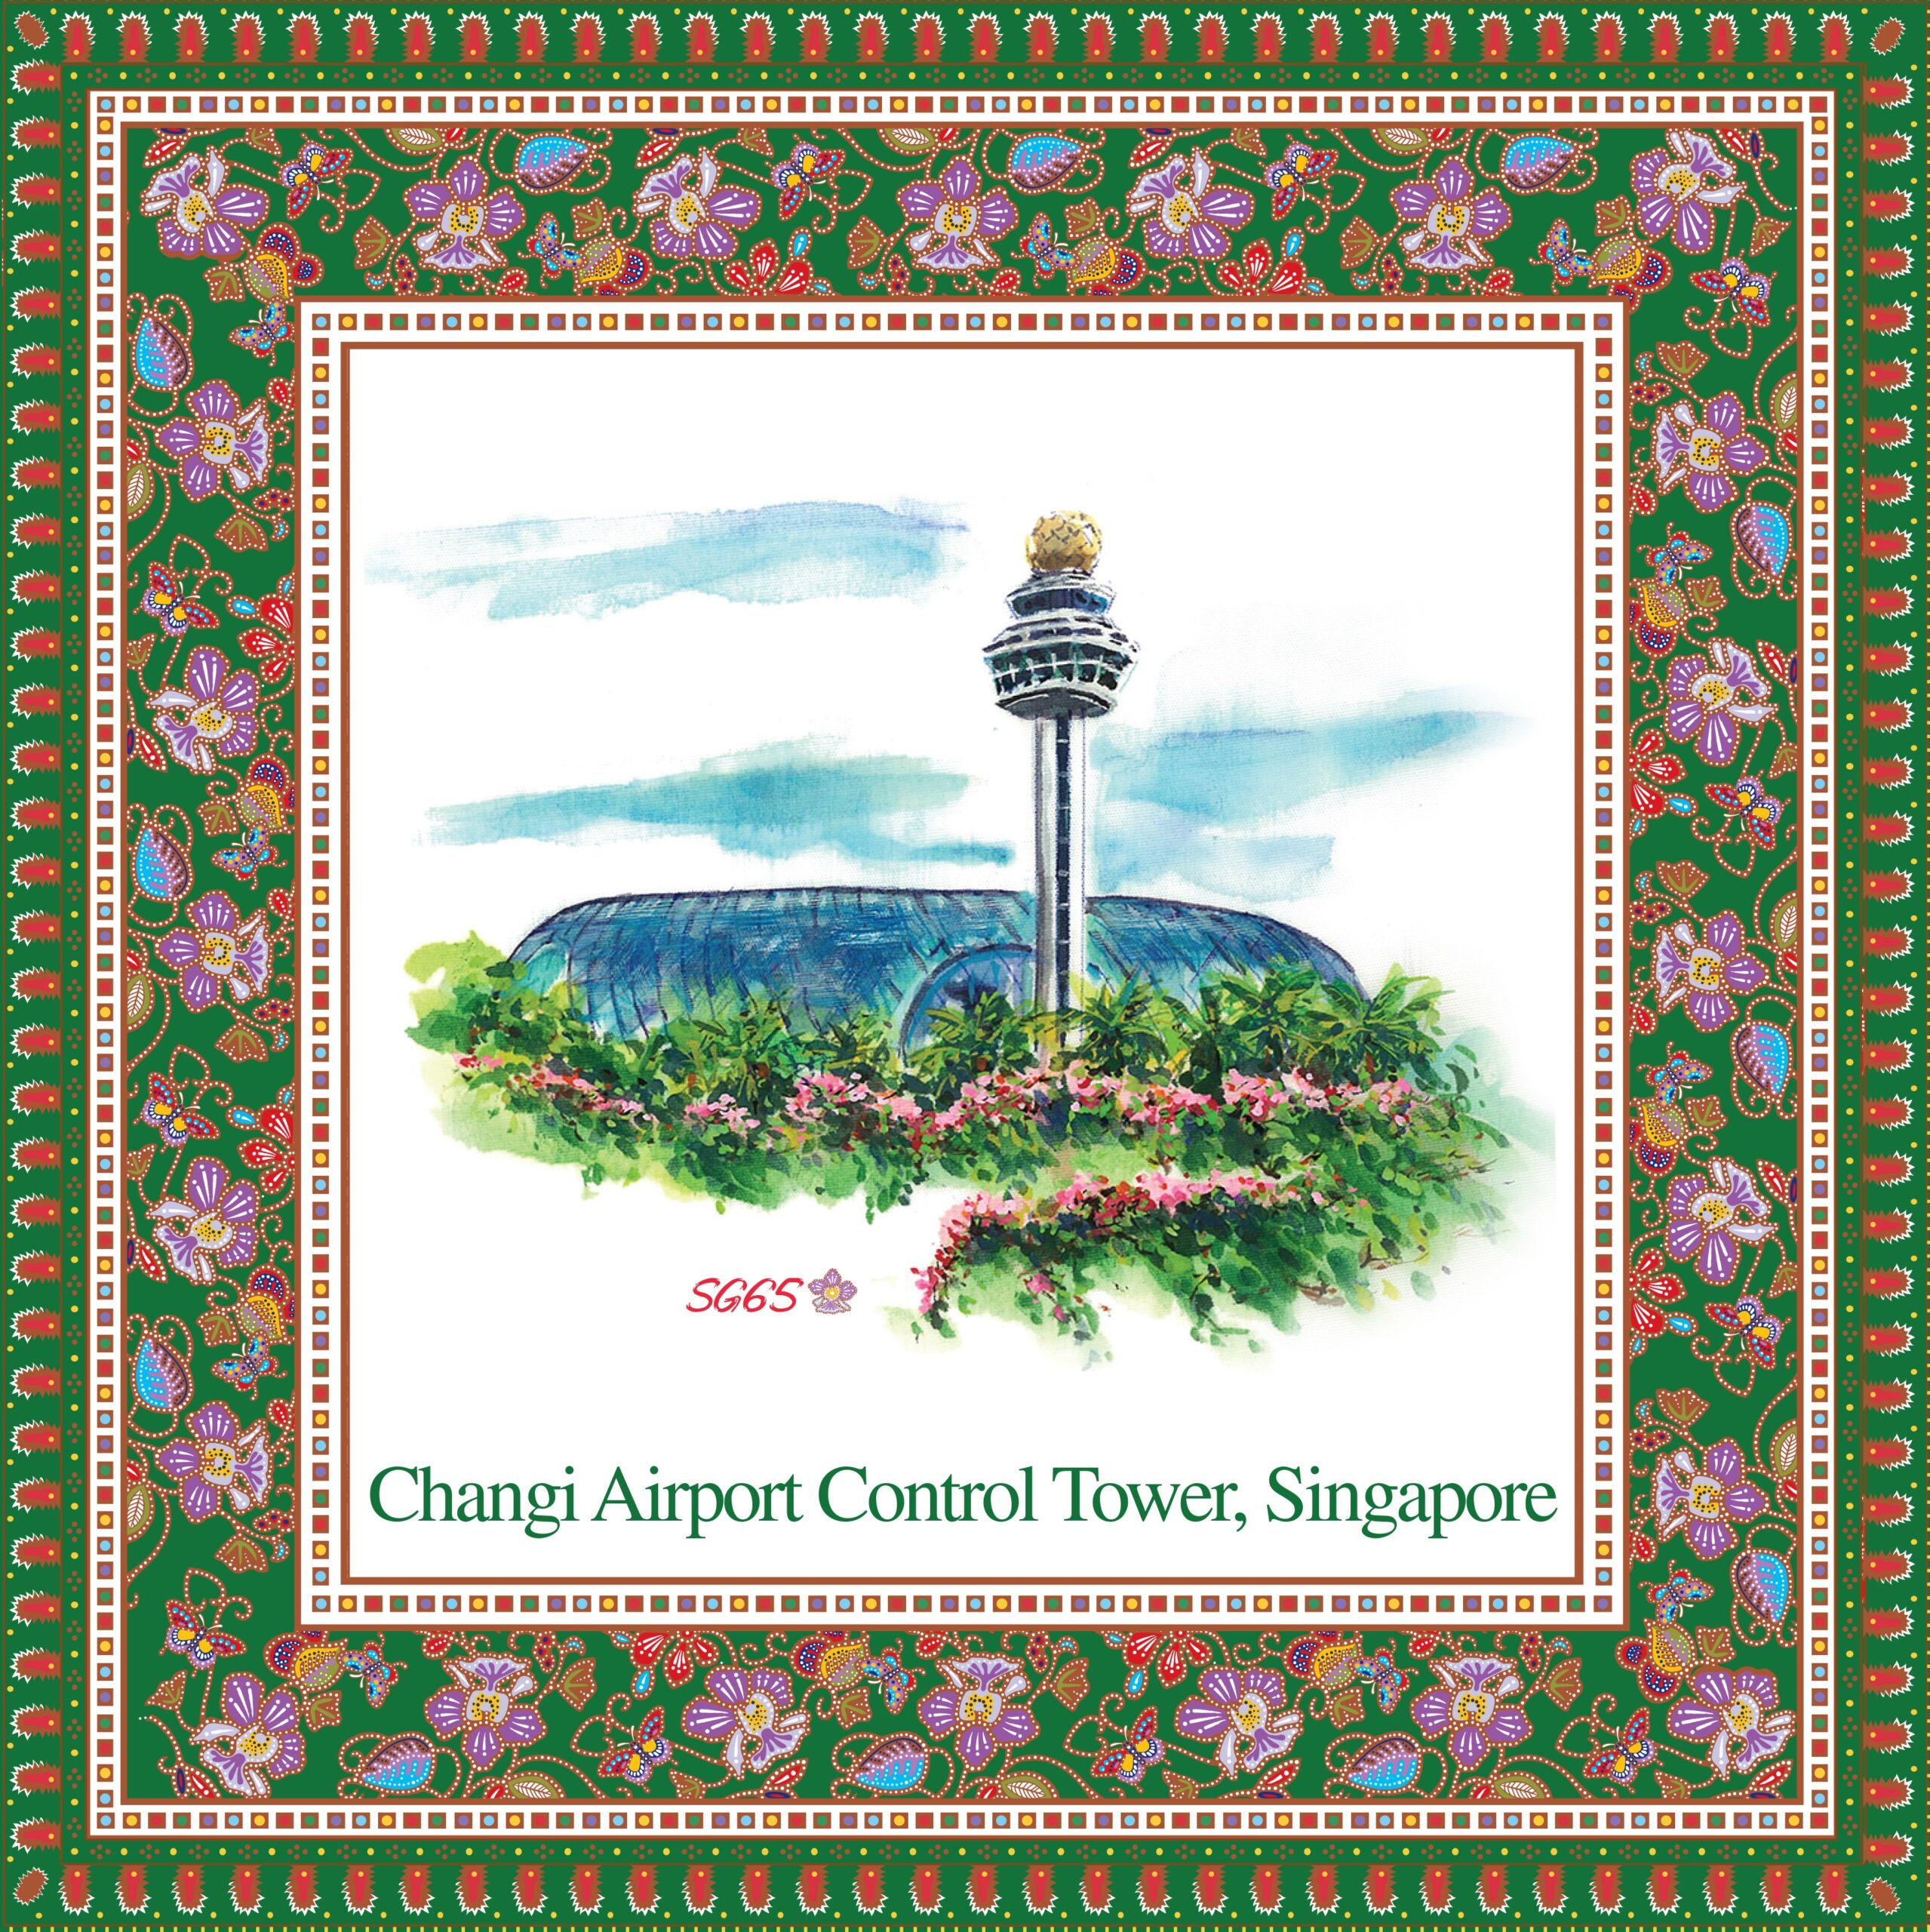 The Changi Airport Control Tower